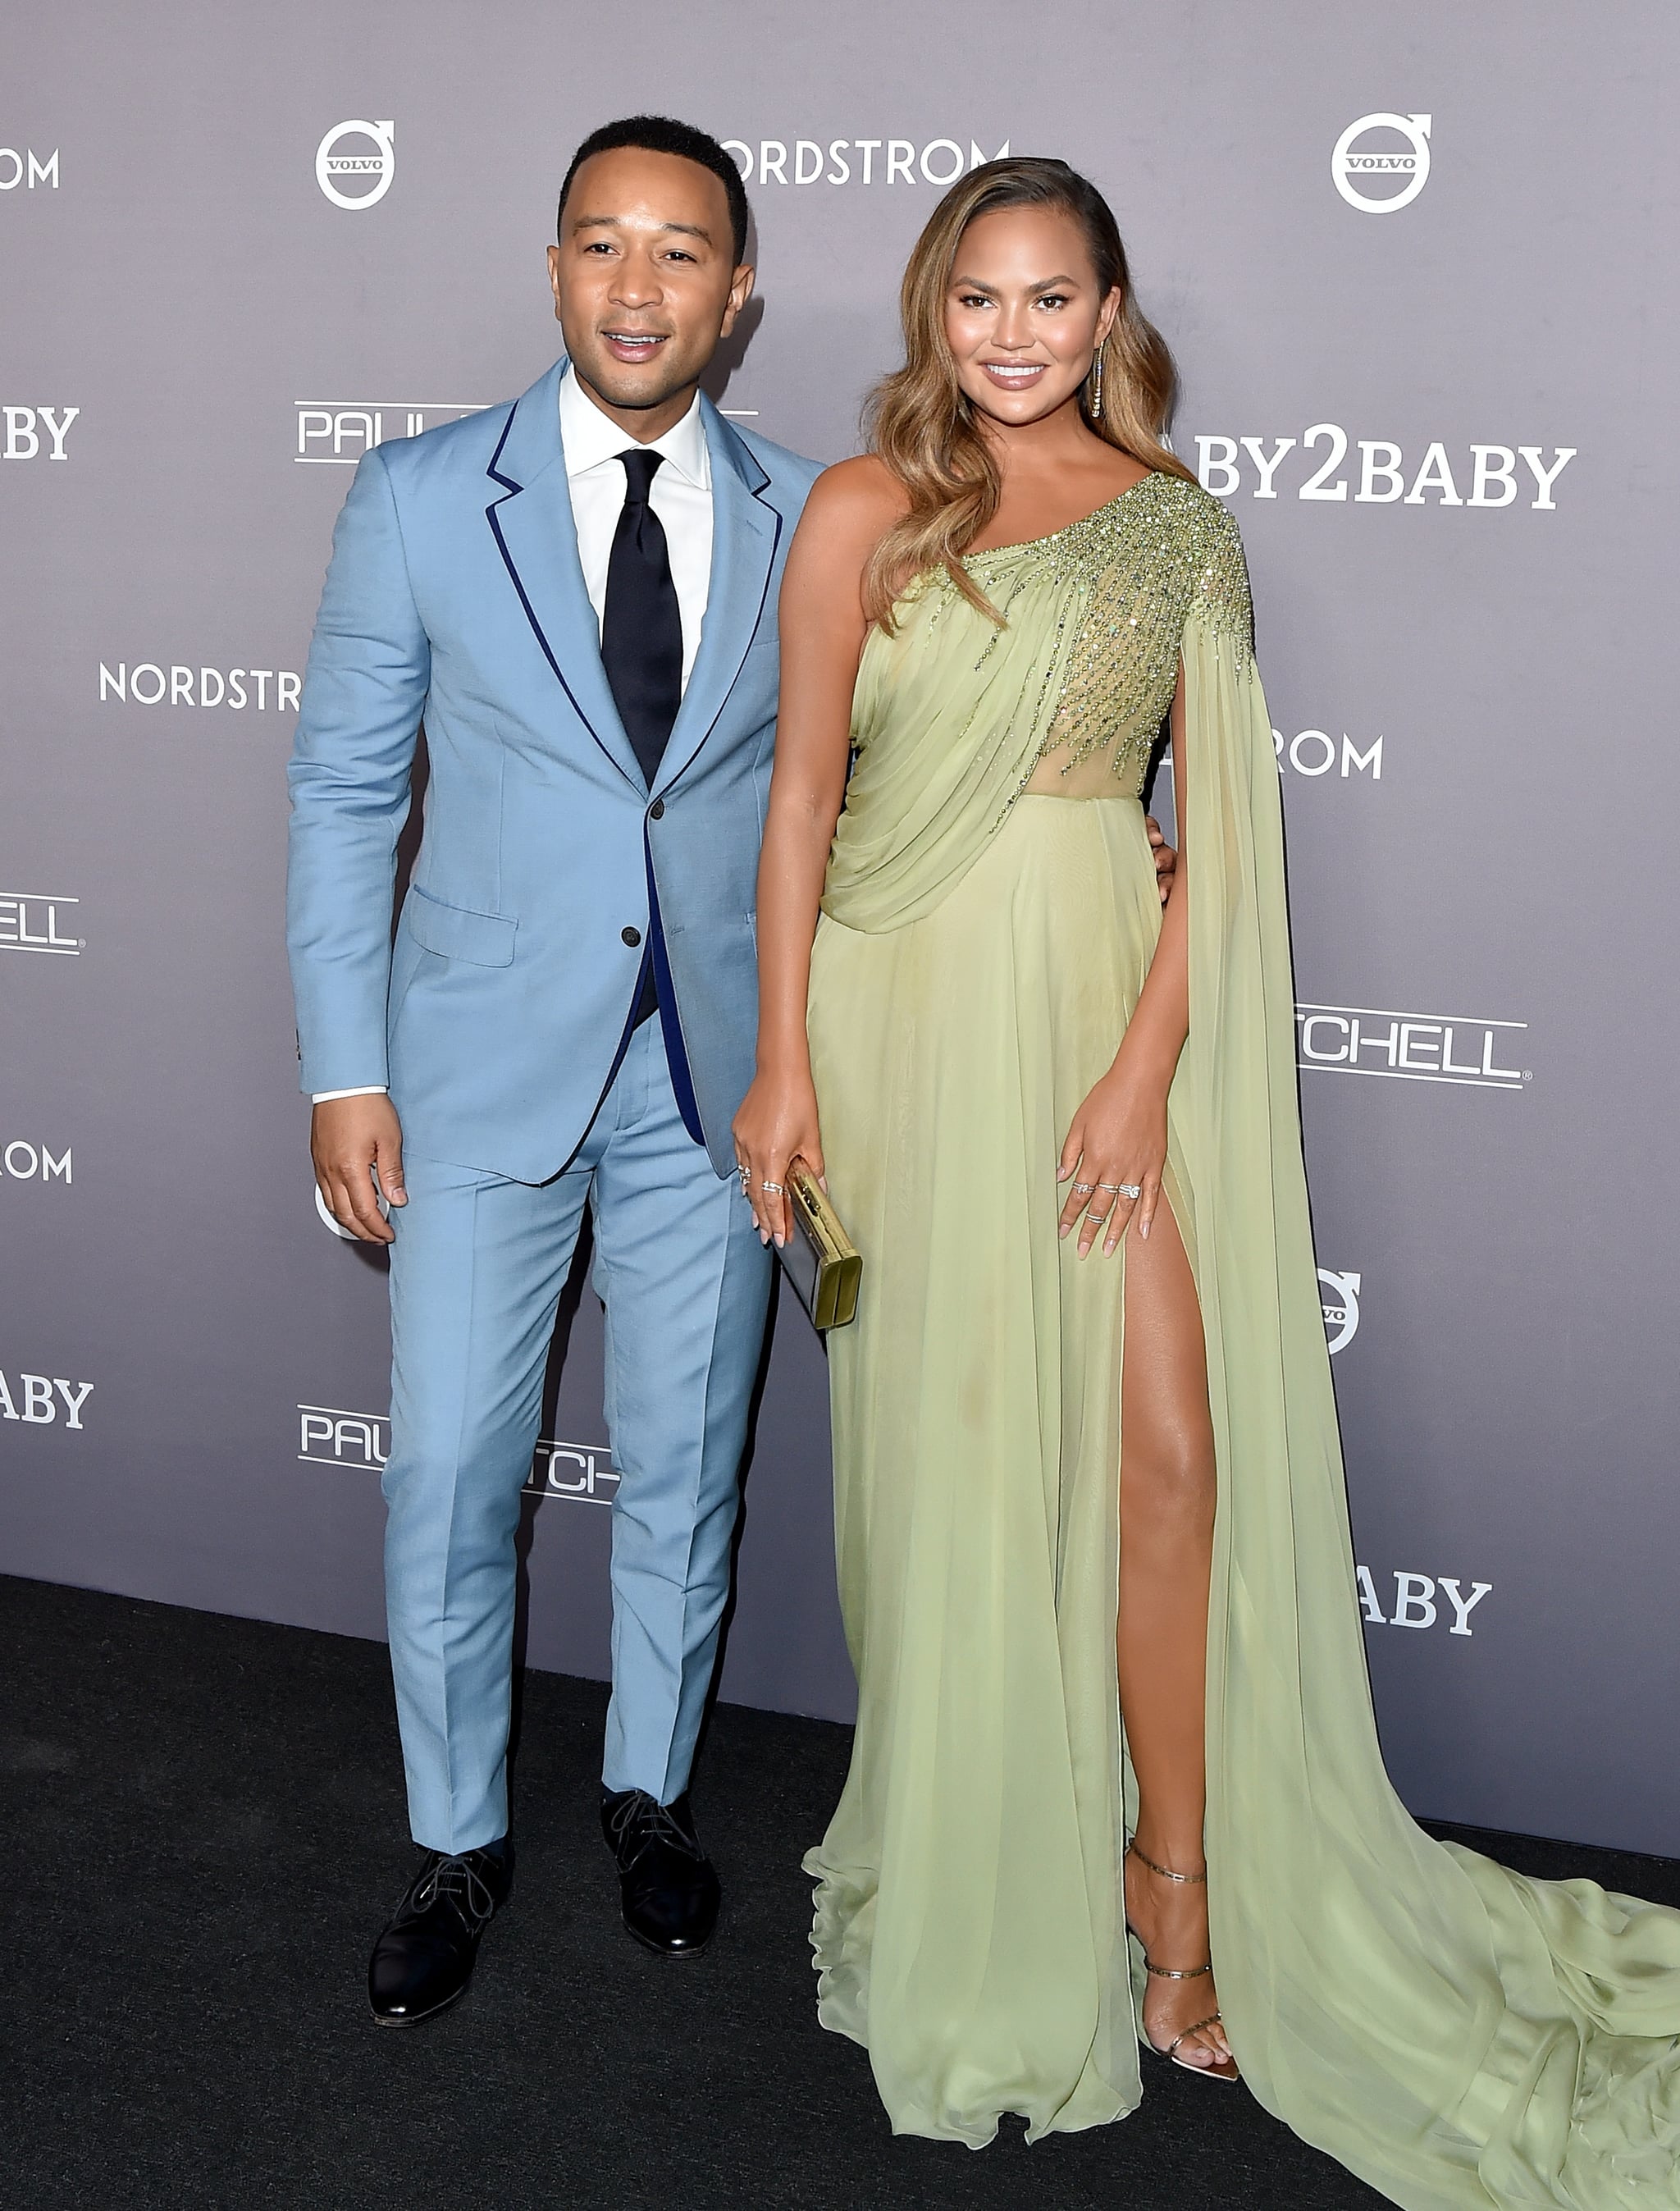 CULVER CITY, CALIFORNIA - NOVEMBER 09: John Legend and Chrissy Teigen attend the 2019 Baby2Baby Gala Presented By Paul Mitchell at 3LABS on November 09, 2019 in Culver City, California. (Photo by Axelle/Bauer-Griffin/FilmMagic)